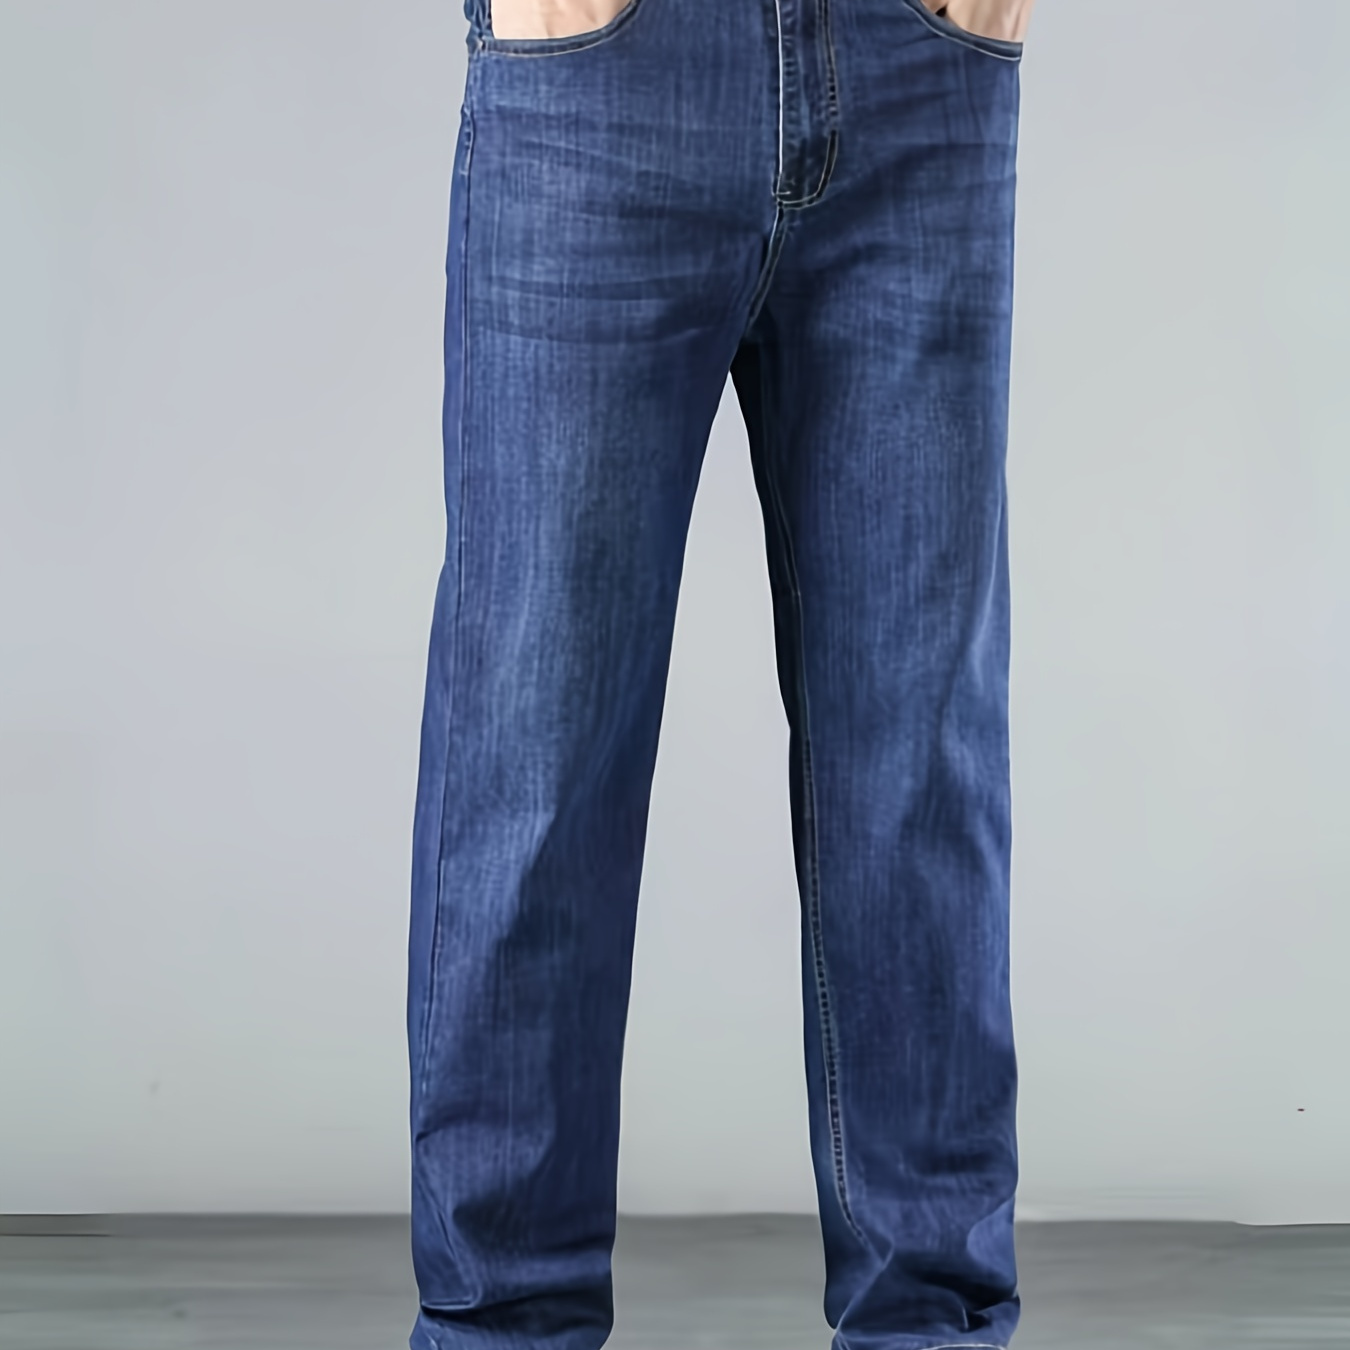 

Men's Regular Fit And Cuffed Solid Denim Jeans With Pockets And Label Patchwork, Casual And Chic Jeans Suitable For Summer Outdoors Wear, Old Money Style